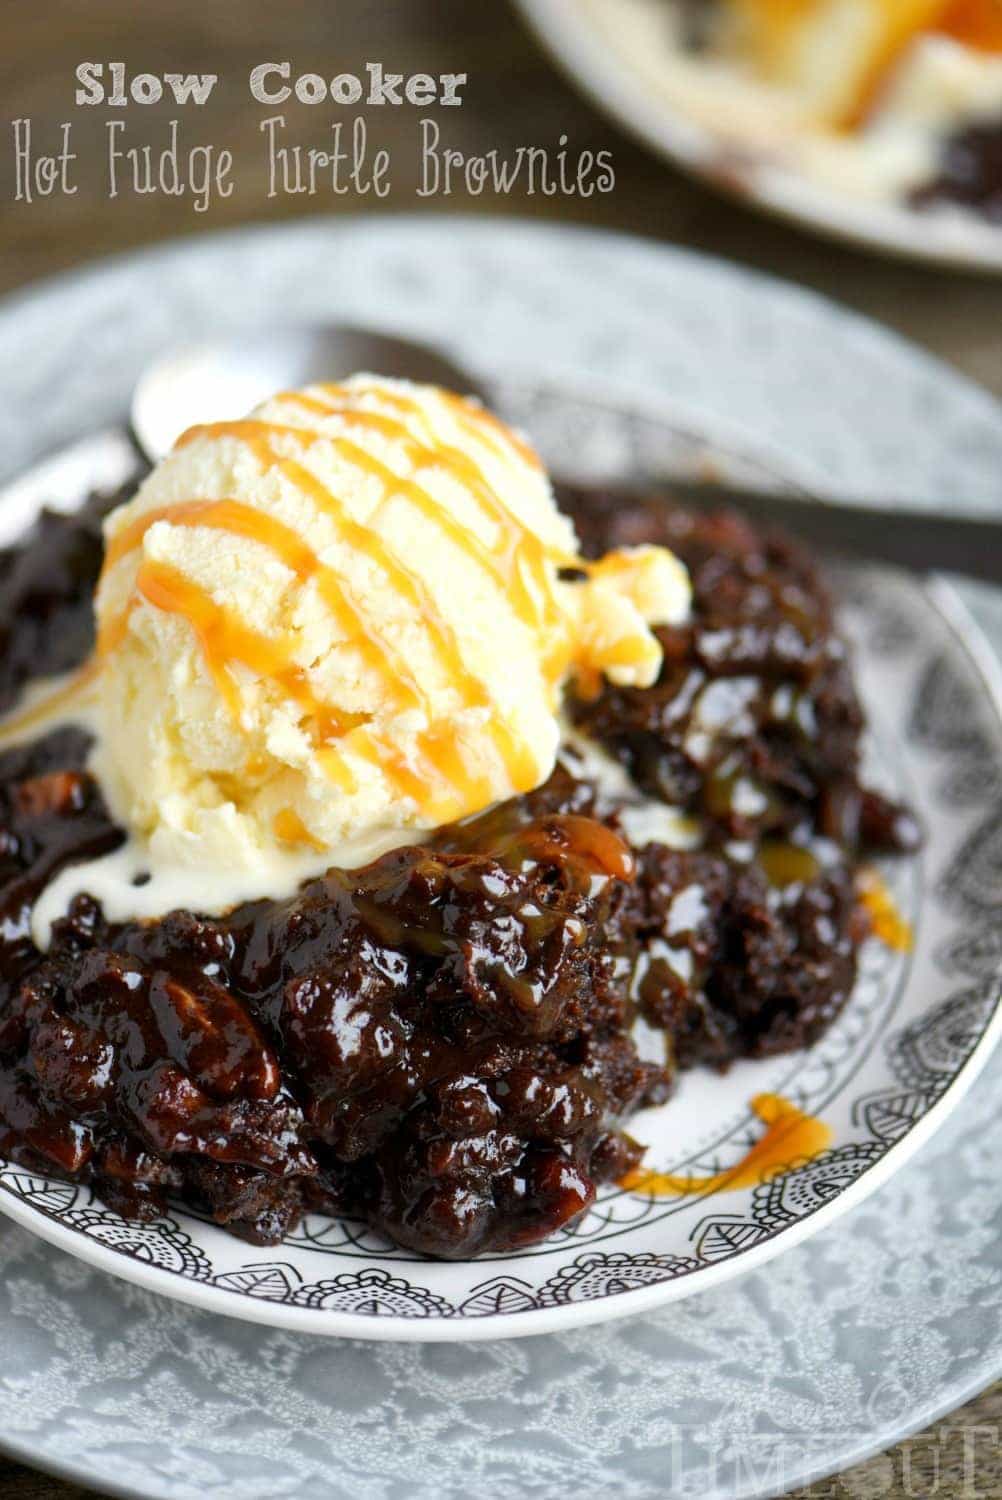 Fabulously gooey and outrageously delicious, these Slow Cooker Hot Fudge Turtle Brownies are going to rock your world! Hot fudge sauce, caramel, pecans, and gooey brownies come together for one irresistible dessert! // Mom On Timeout